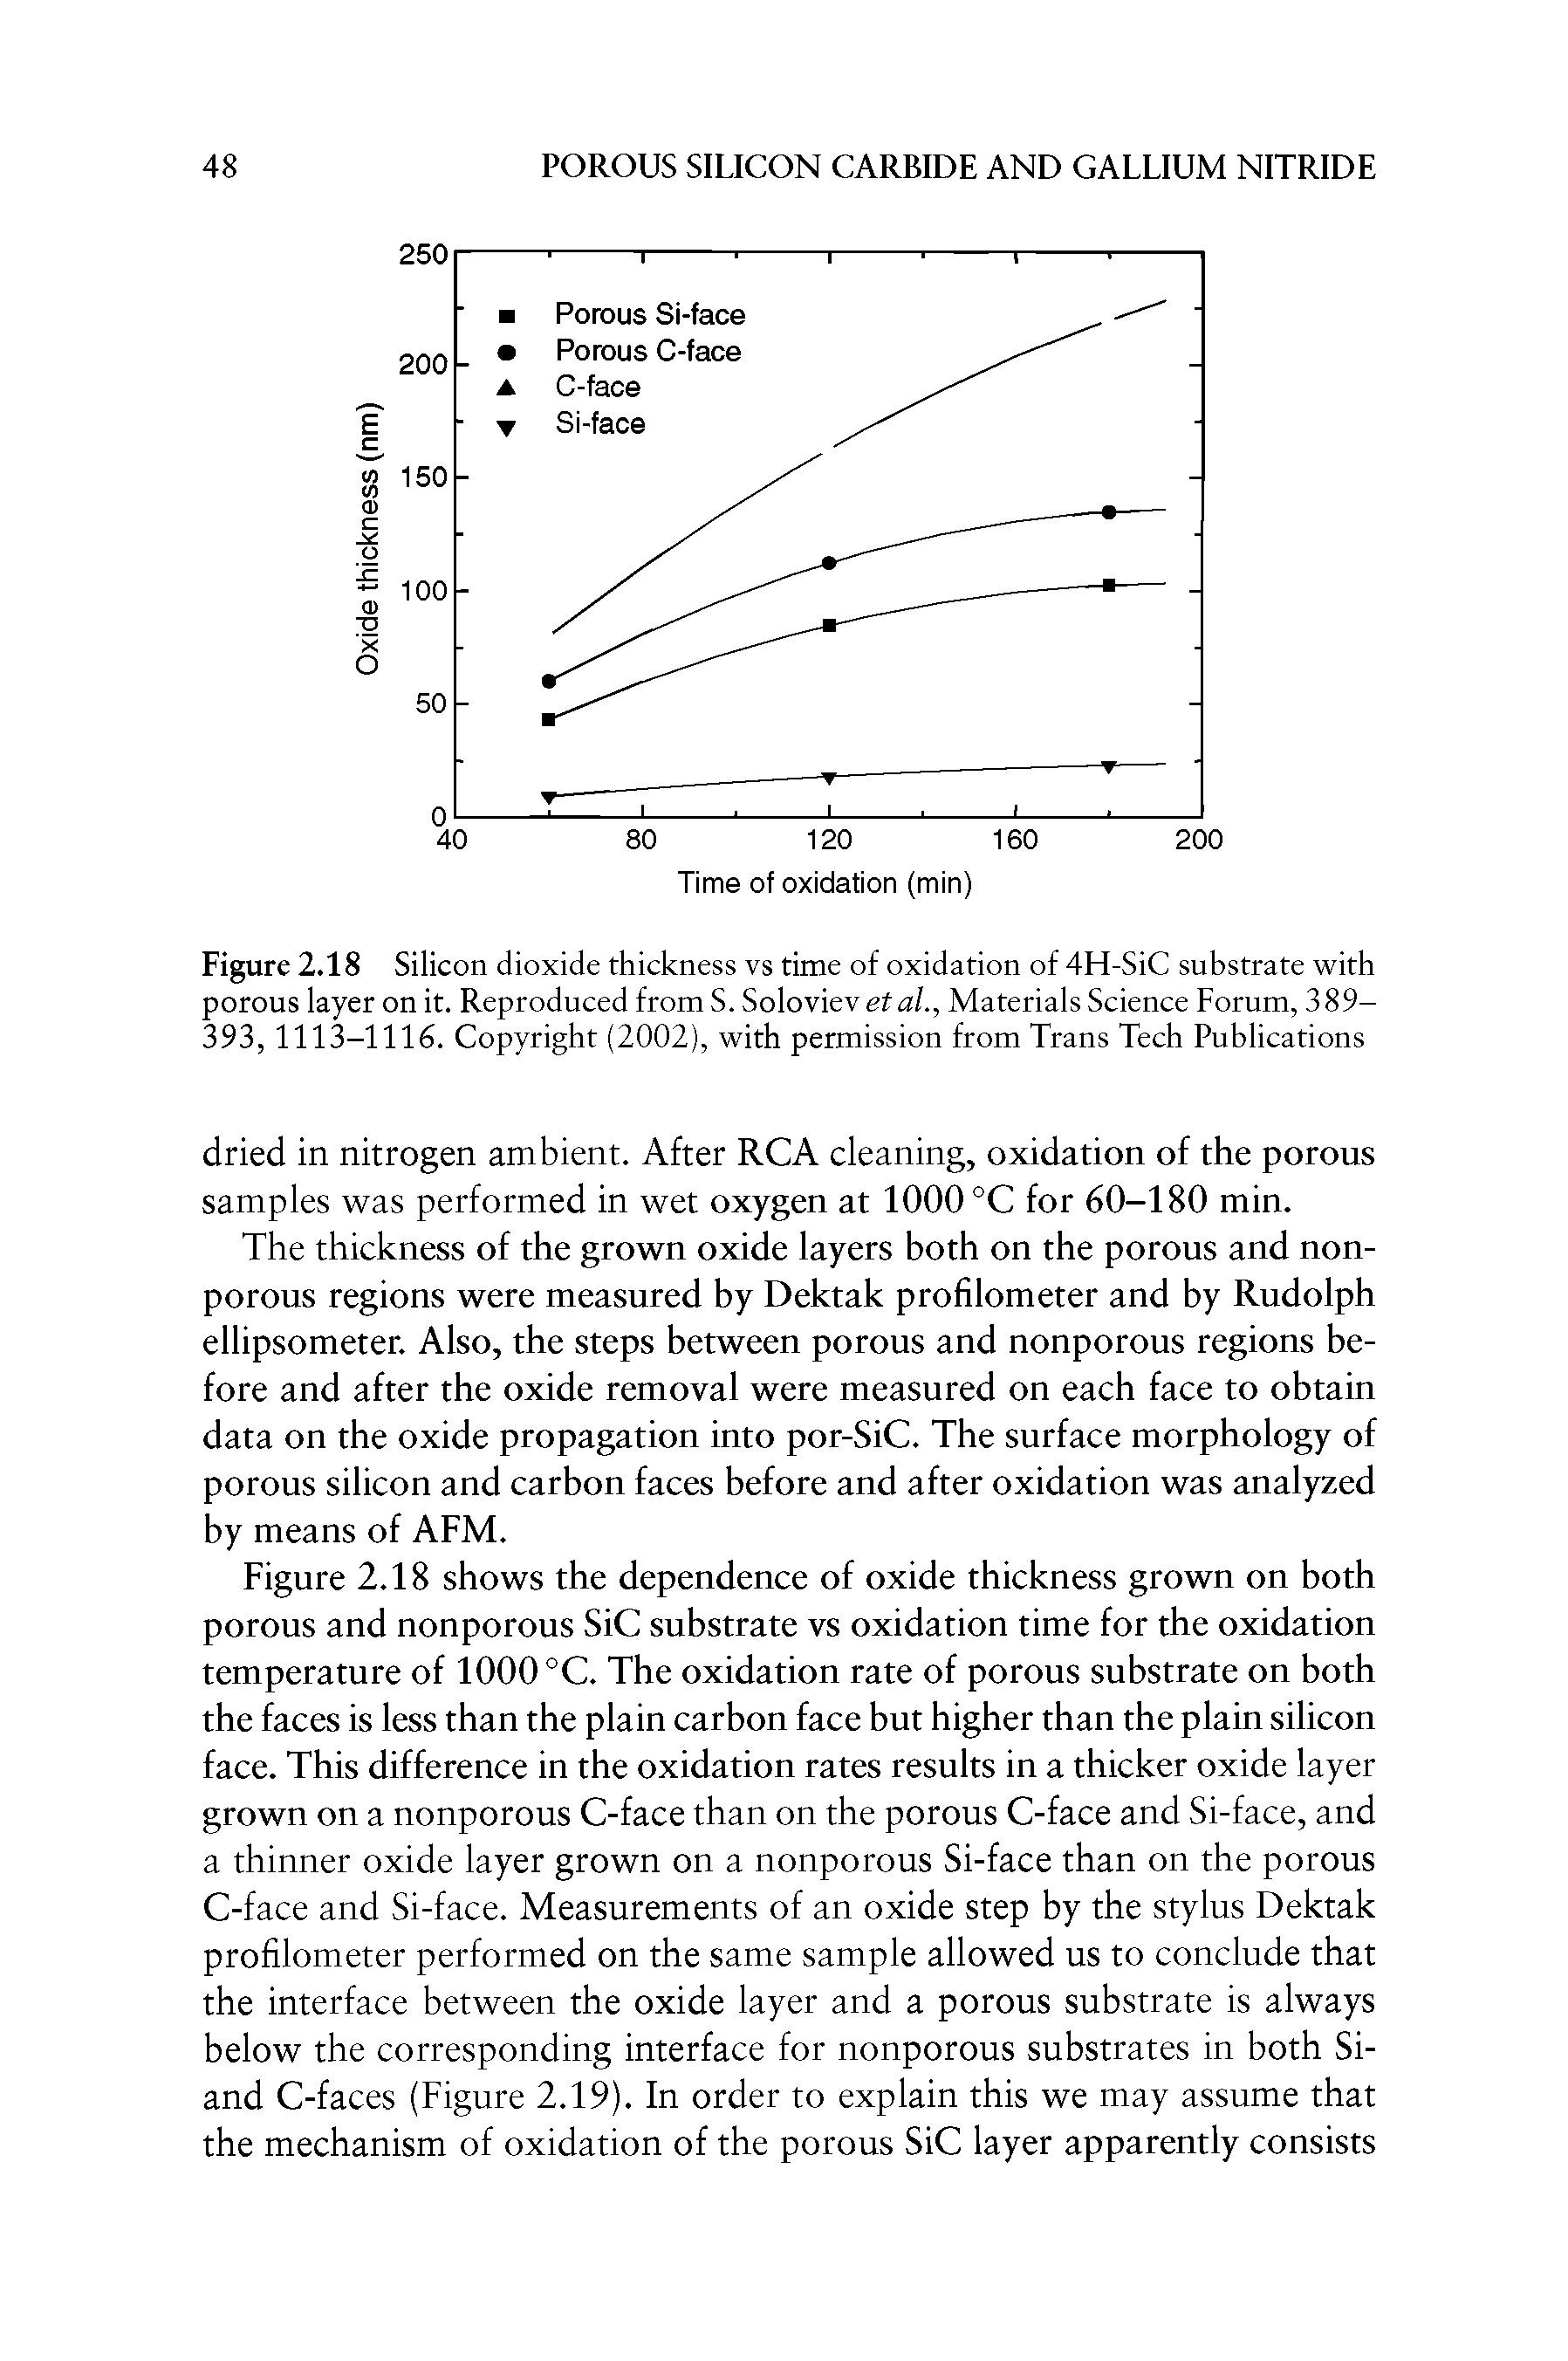 Figure 2.18 Silicon dioxide thickness vs time of oxidation of 4H-SiC substrate with porous layer on it. Reproduced from S. Soloviev et al., Materials Science Forum, 389-393, 1113-1116. Copyright (2002), with permission from Trans Tech Publications...